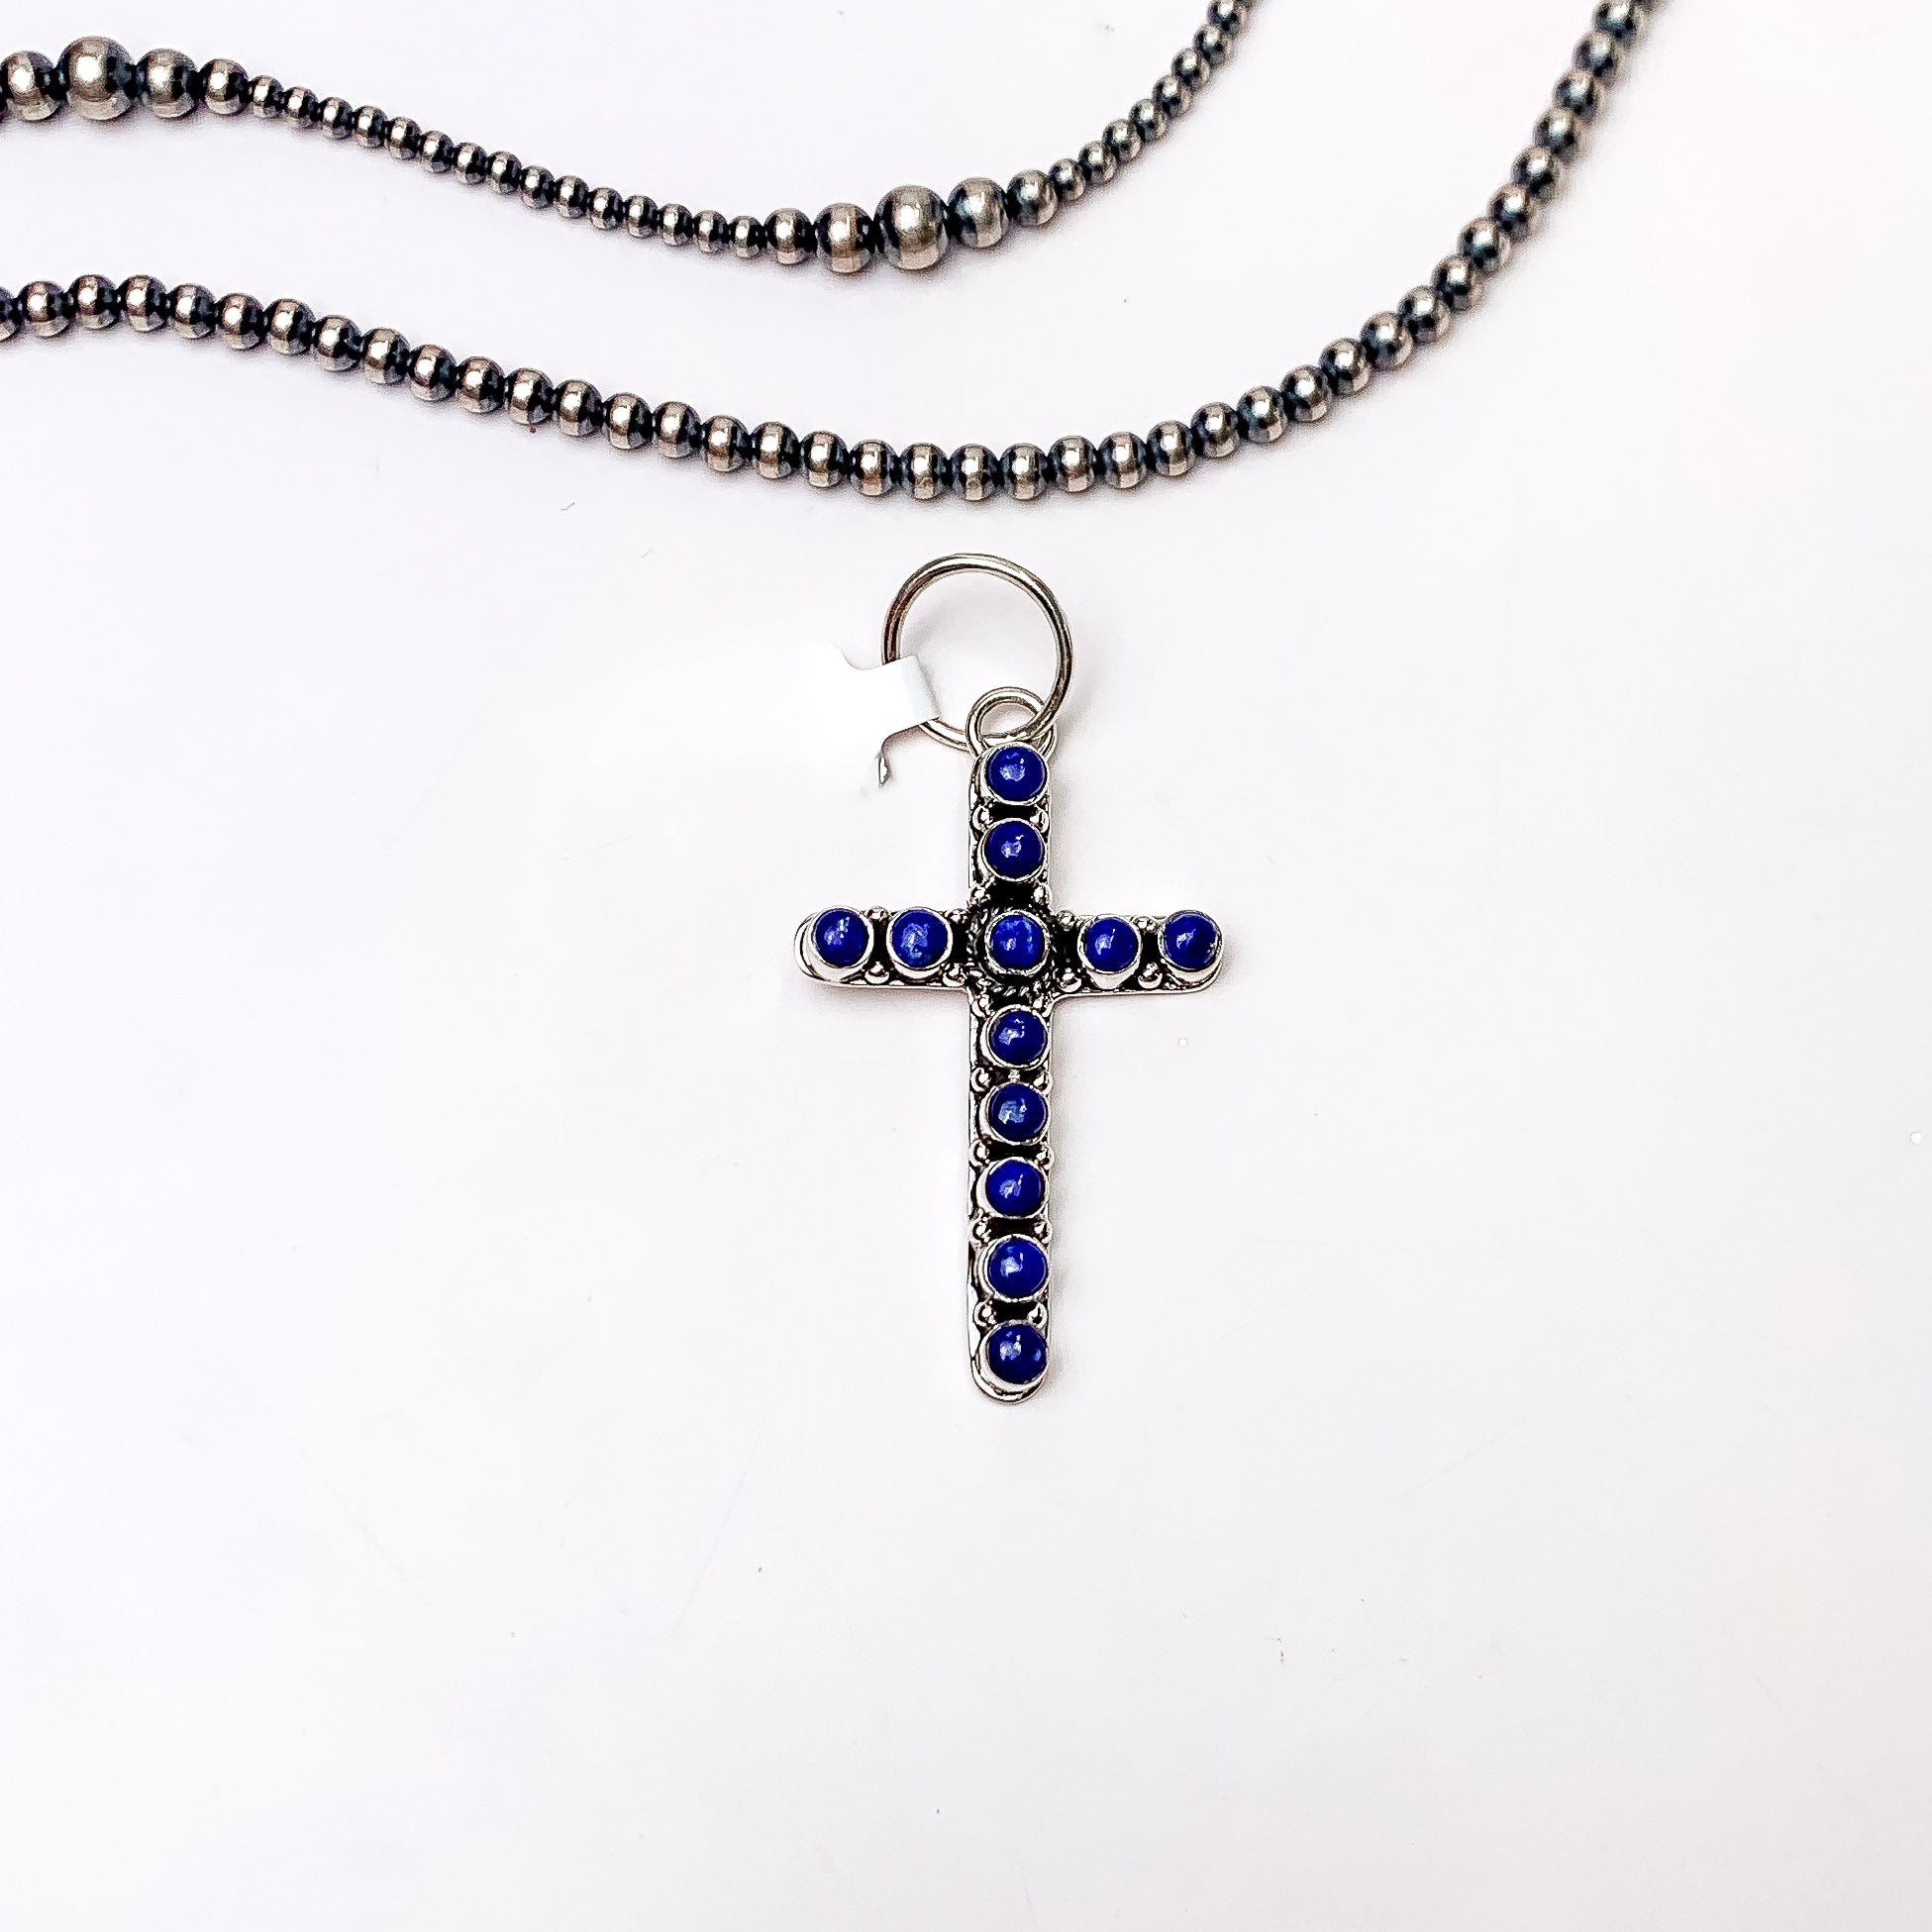 HaDa Collection | Sterling Silver Small Cross Pendant in Dark Lapis Stones